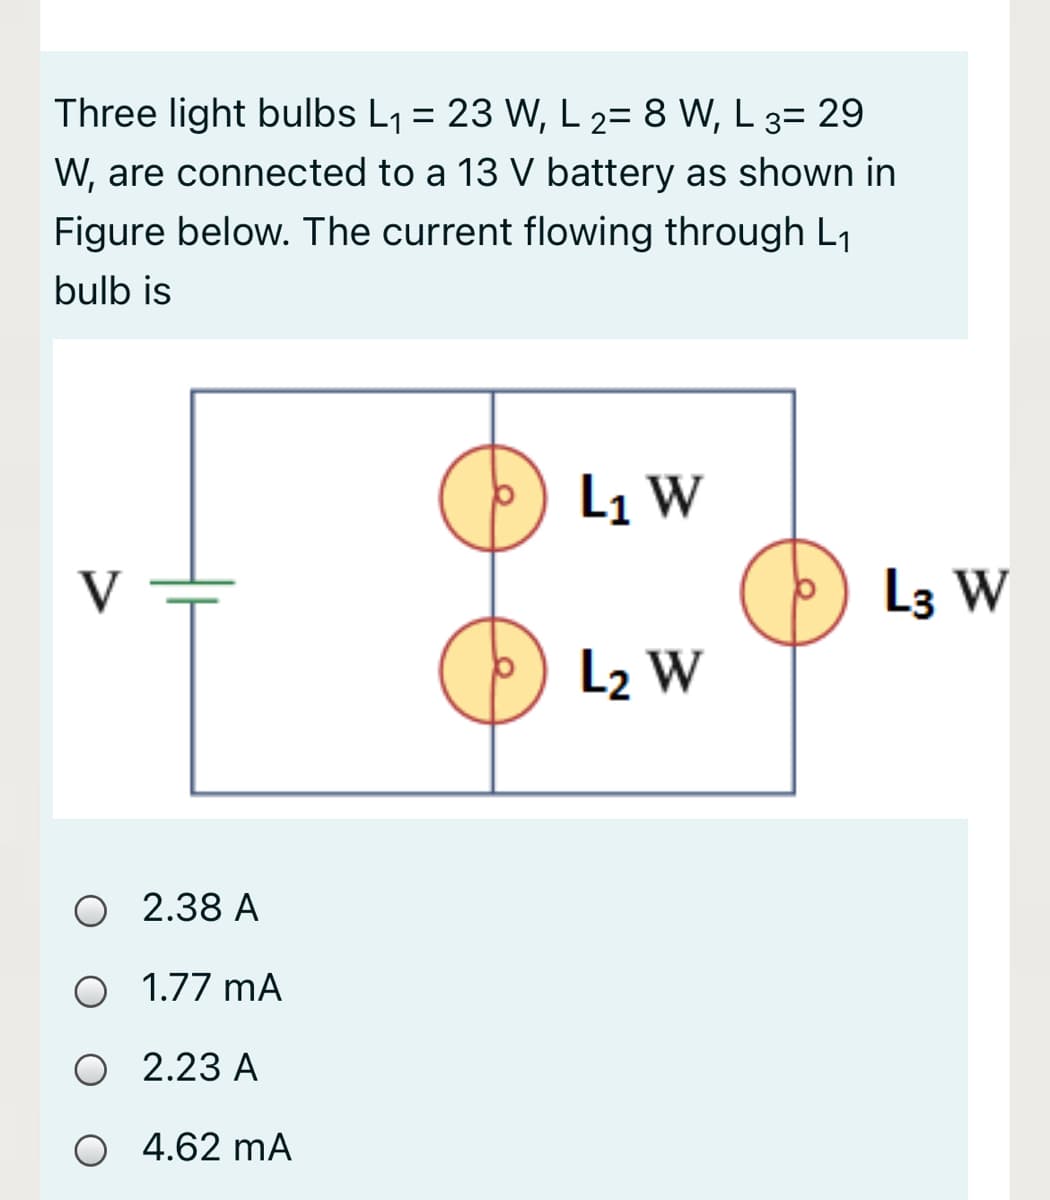 Three light bulbs L1 = 23 W, L 2= 8 W, L 3= 29
W, are connected to a 13 V battery as shown in
Figure below. The current flowing through L1
bulb is
L1 W
V
L3 W
L2 W
O 2.38 A
O 1.77 mA
O 2.23 A
O 4.62 mA
